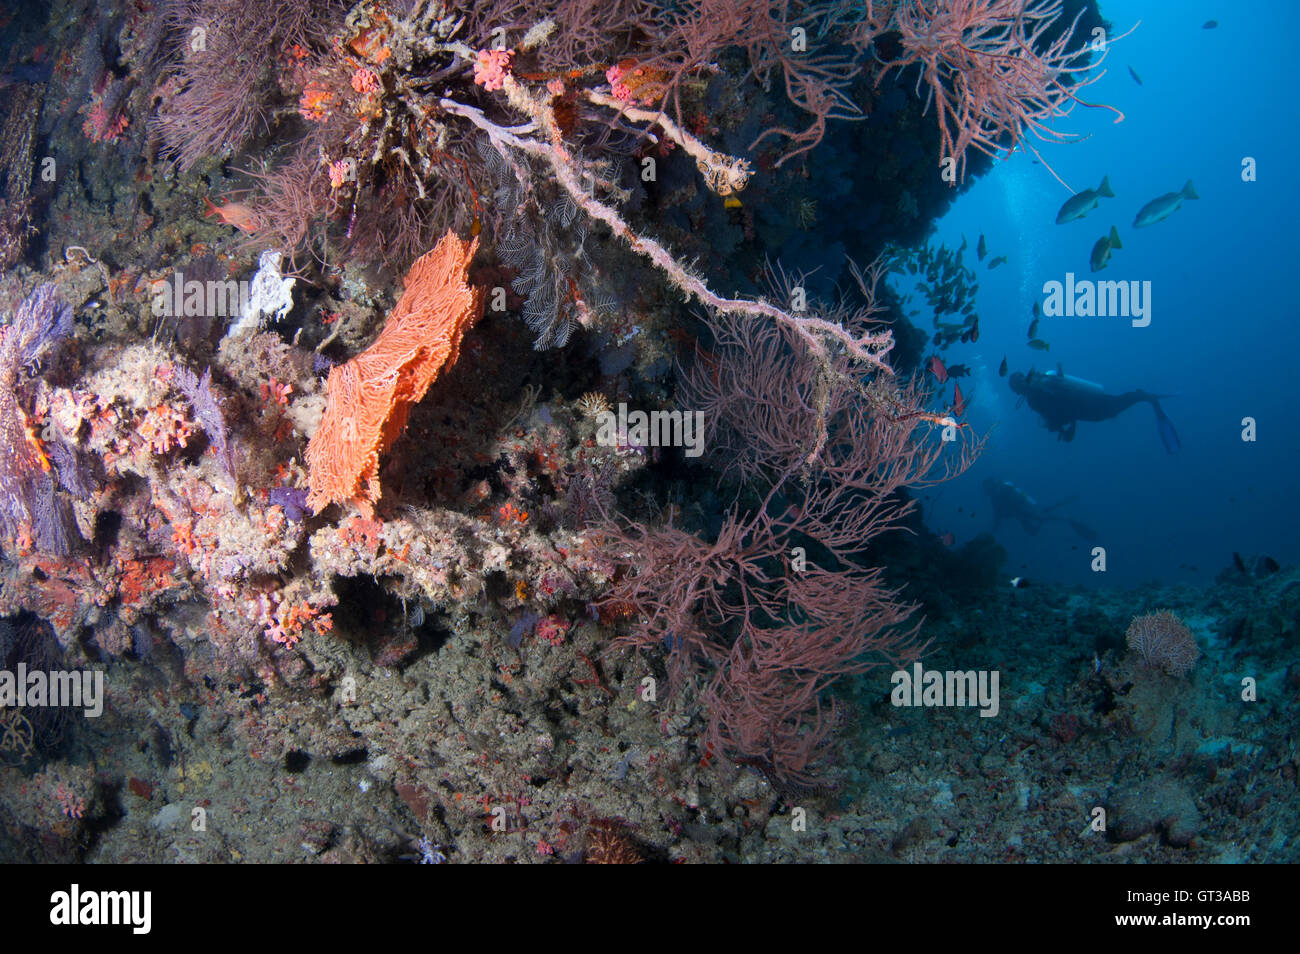 Reef steaming with marine life of diverse nature. Stock Photo